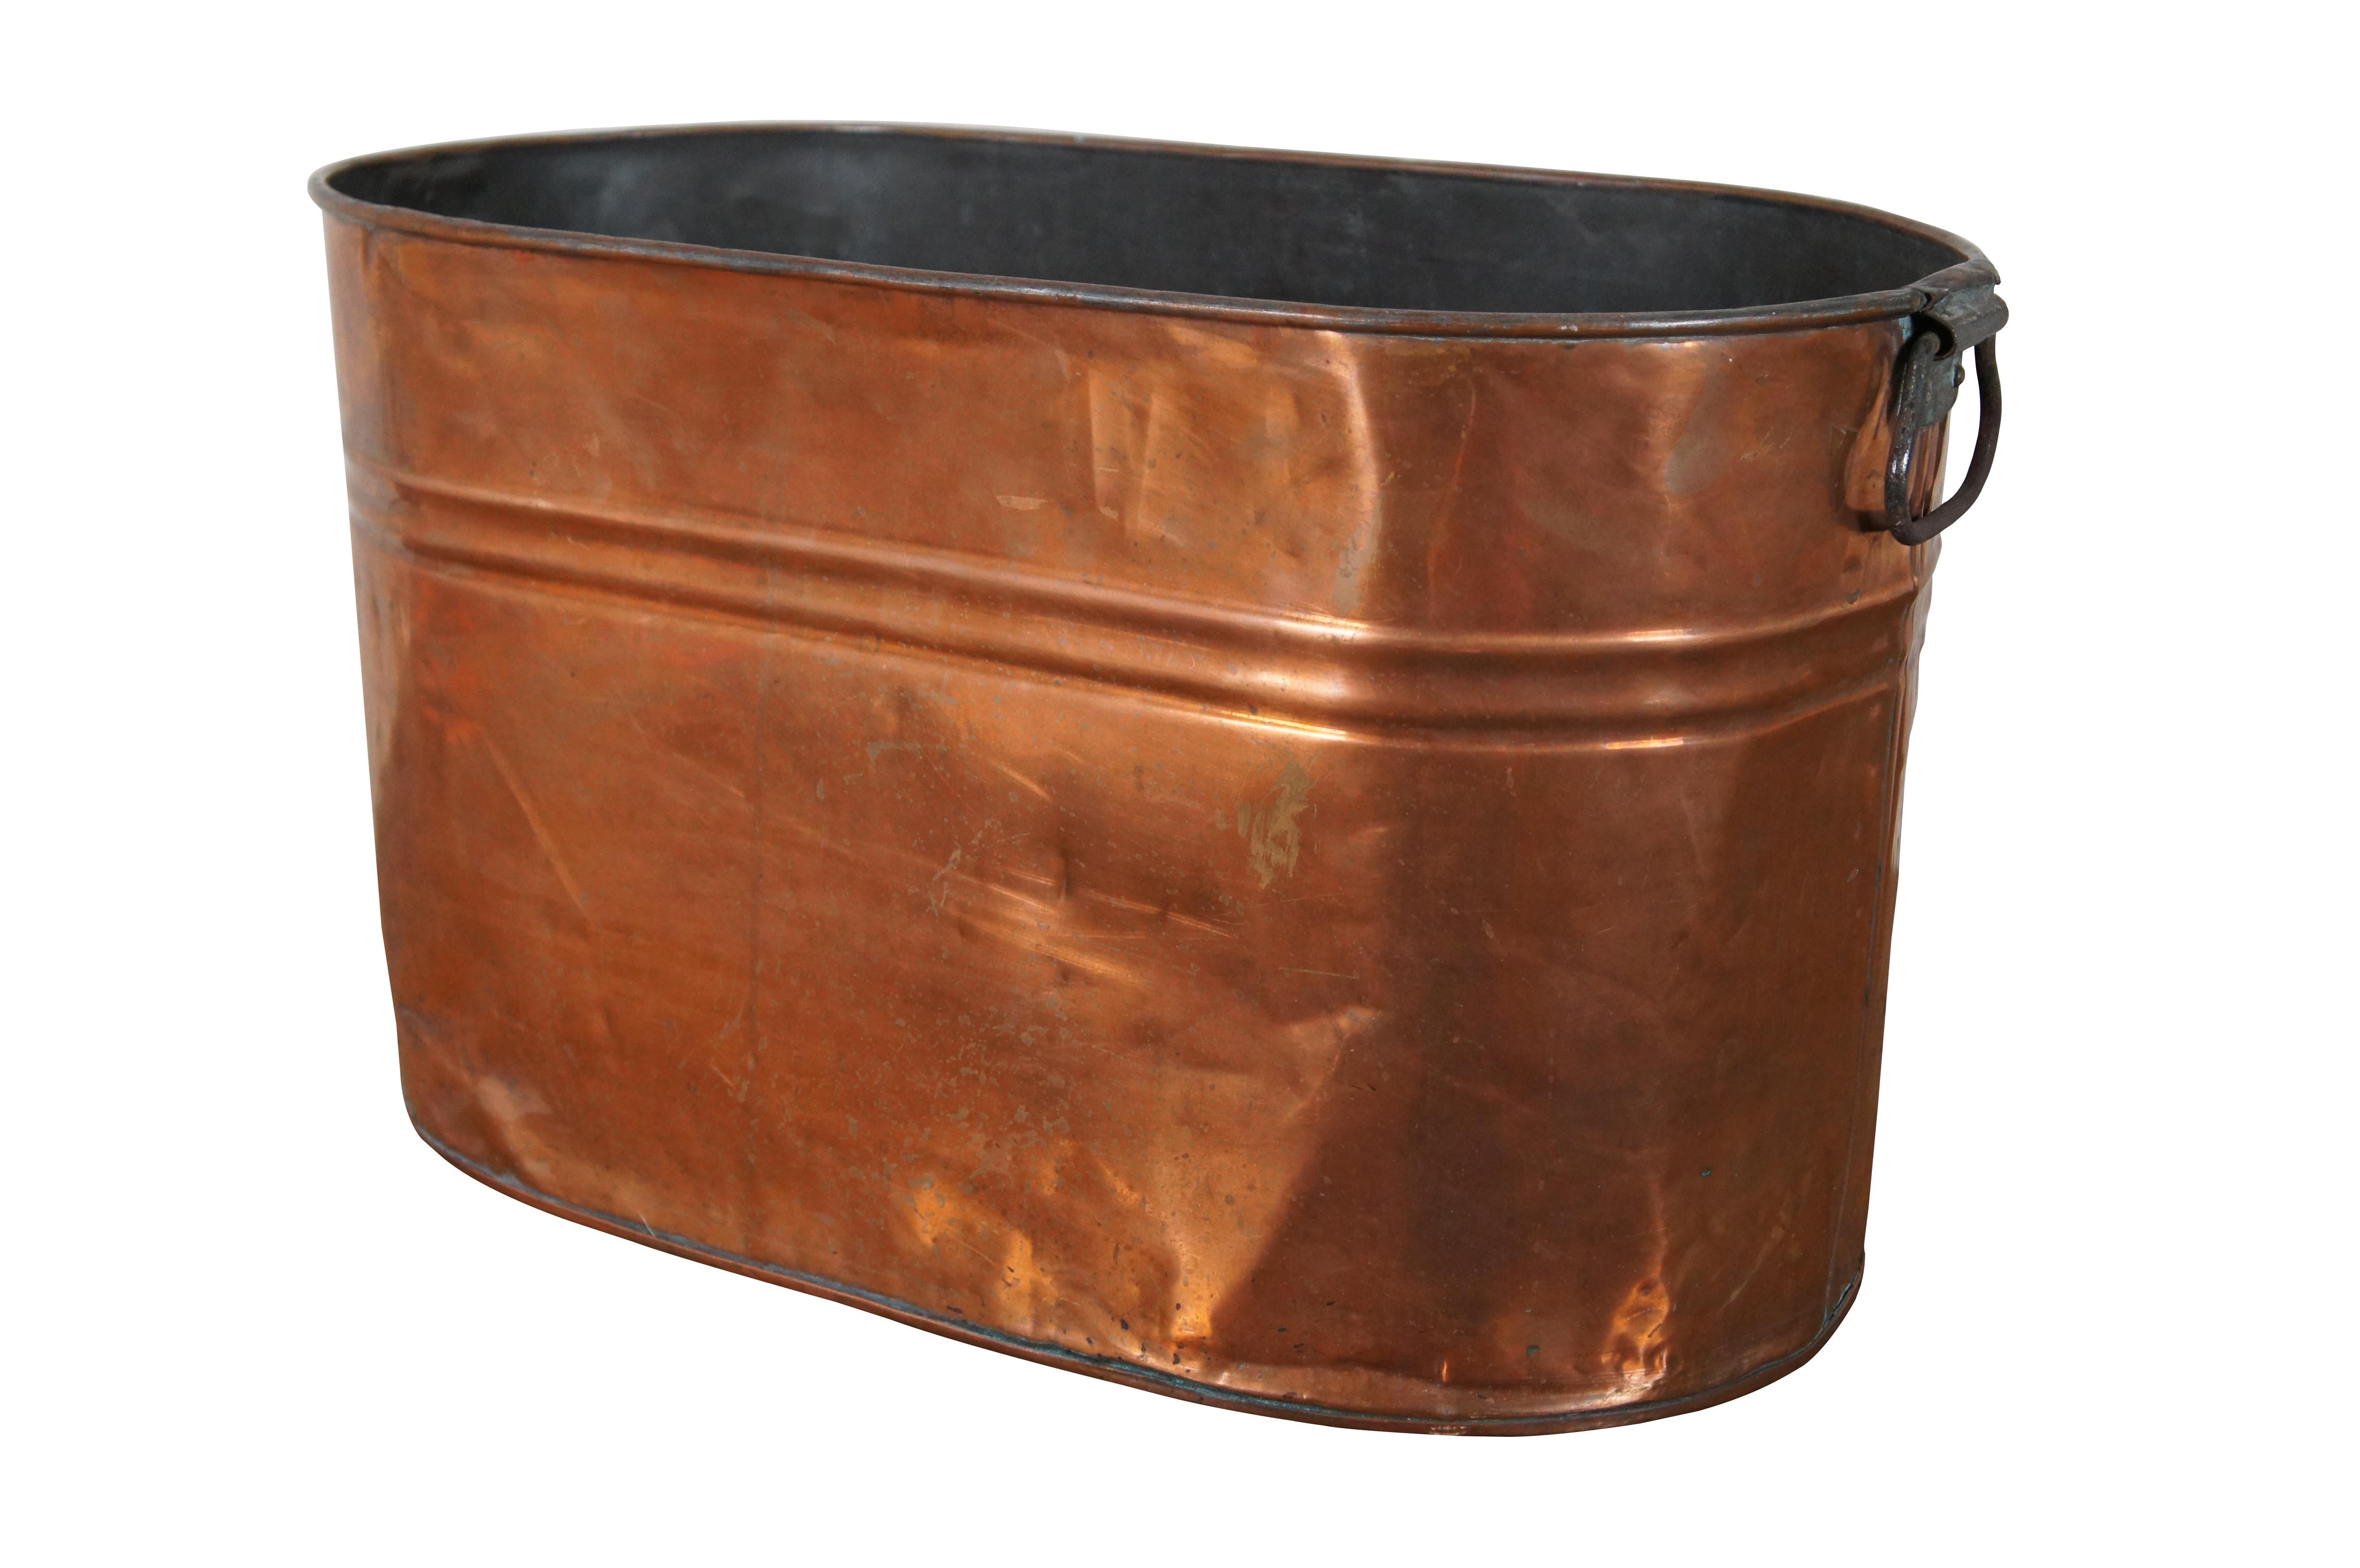 Antique early 20th century copper boiler / wash tub, oval shaped with iron handles. Measure: 22